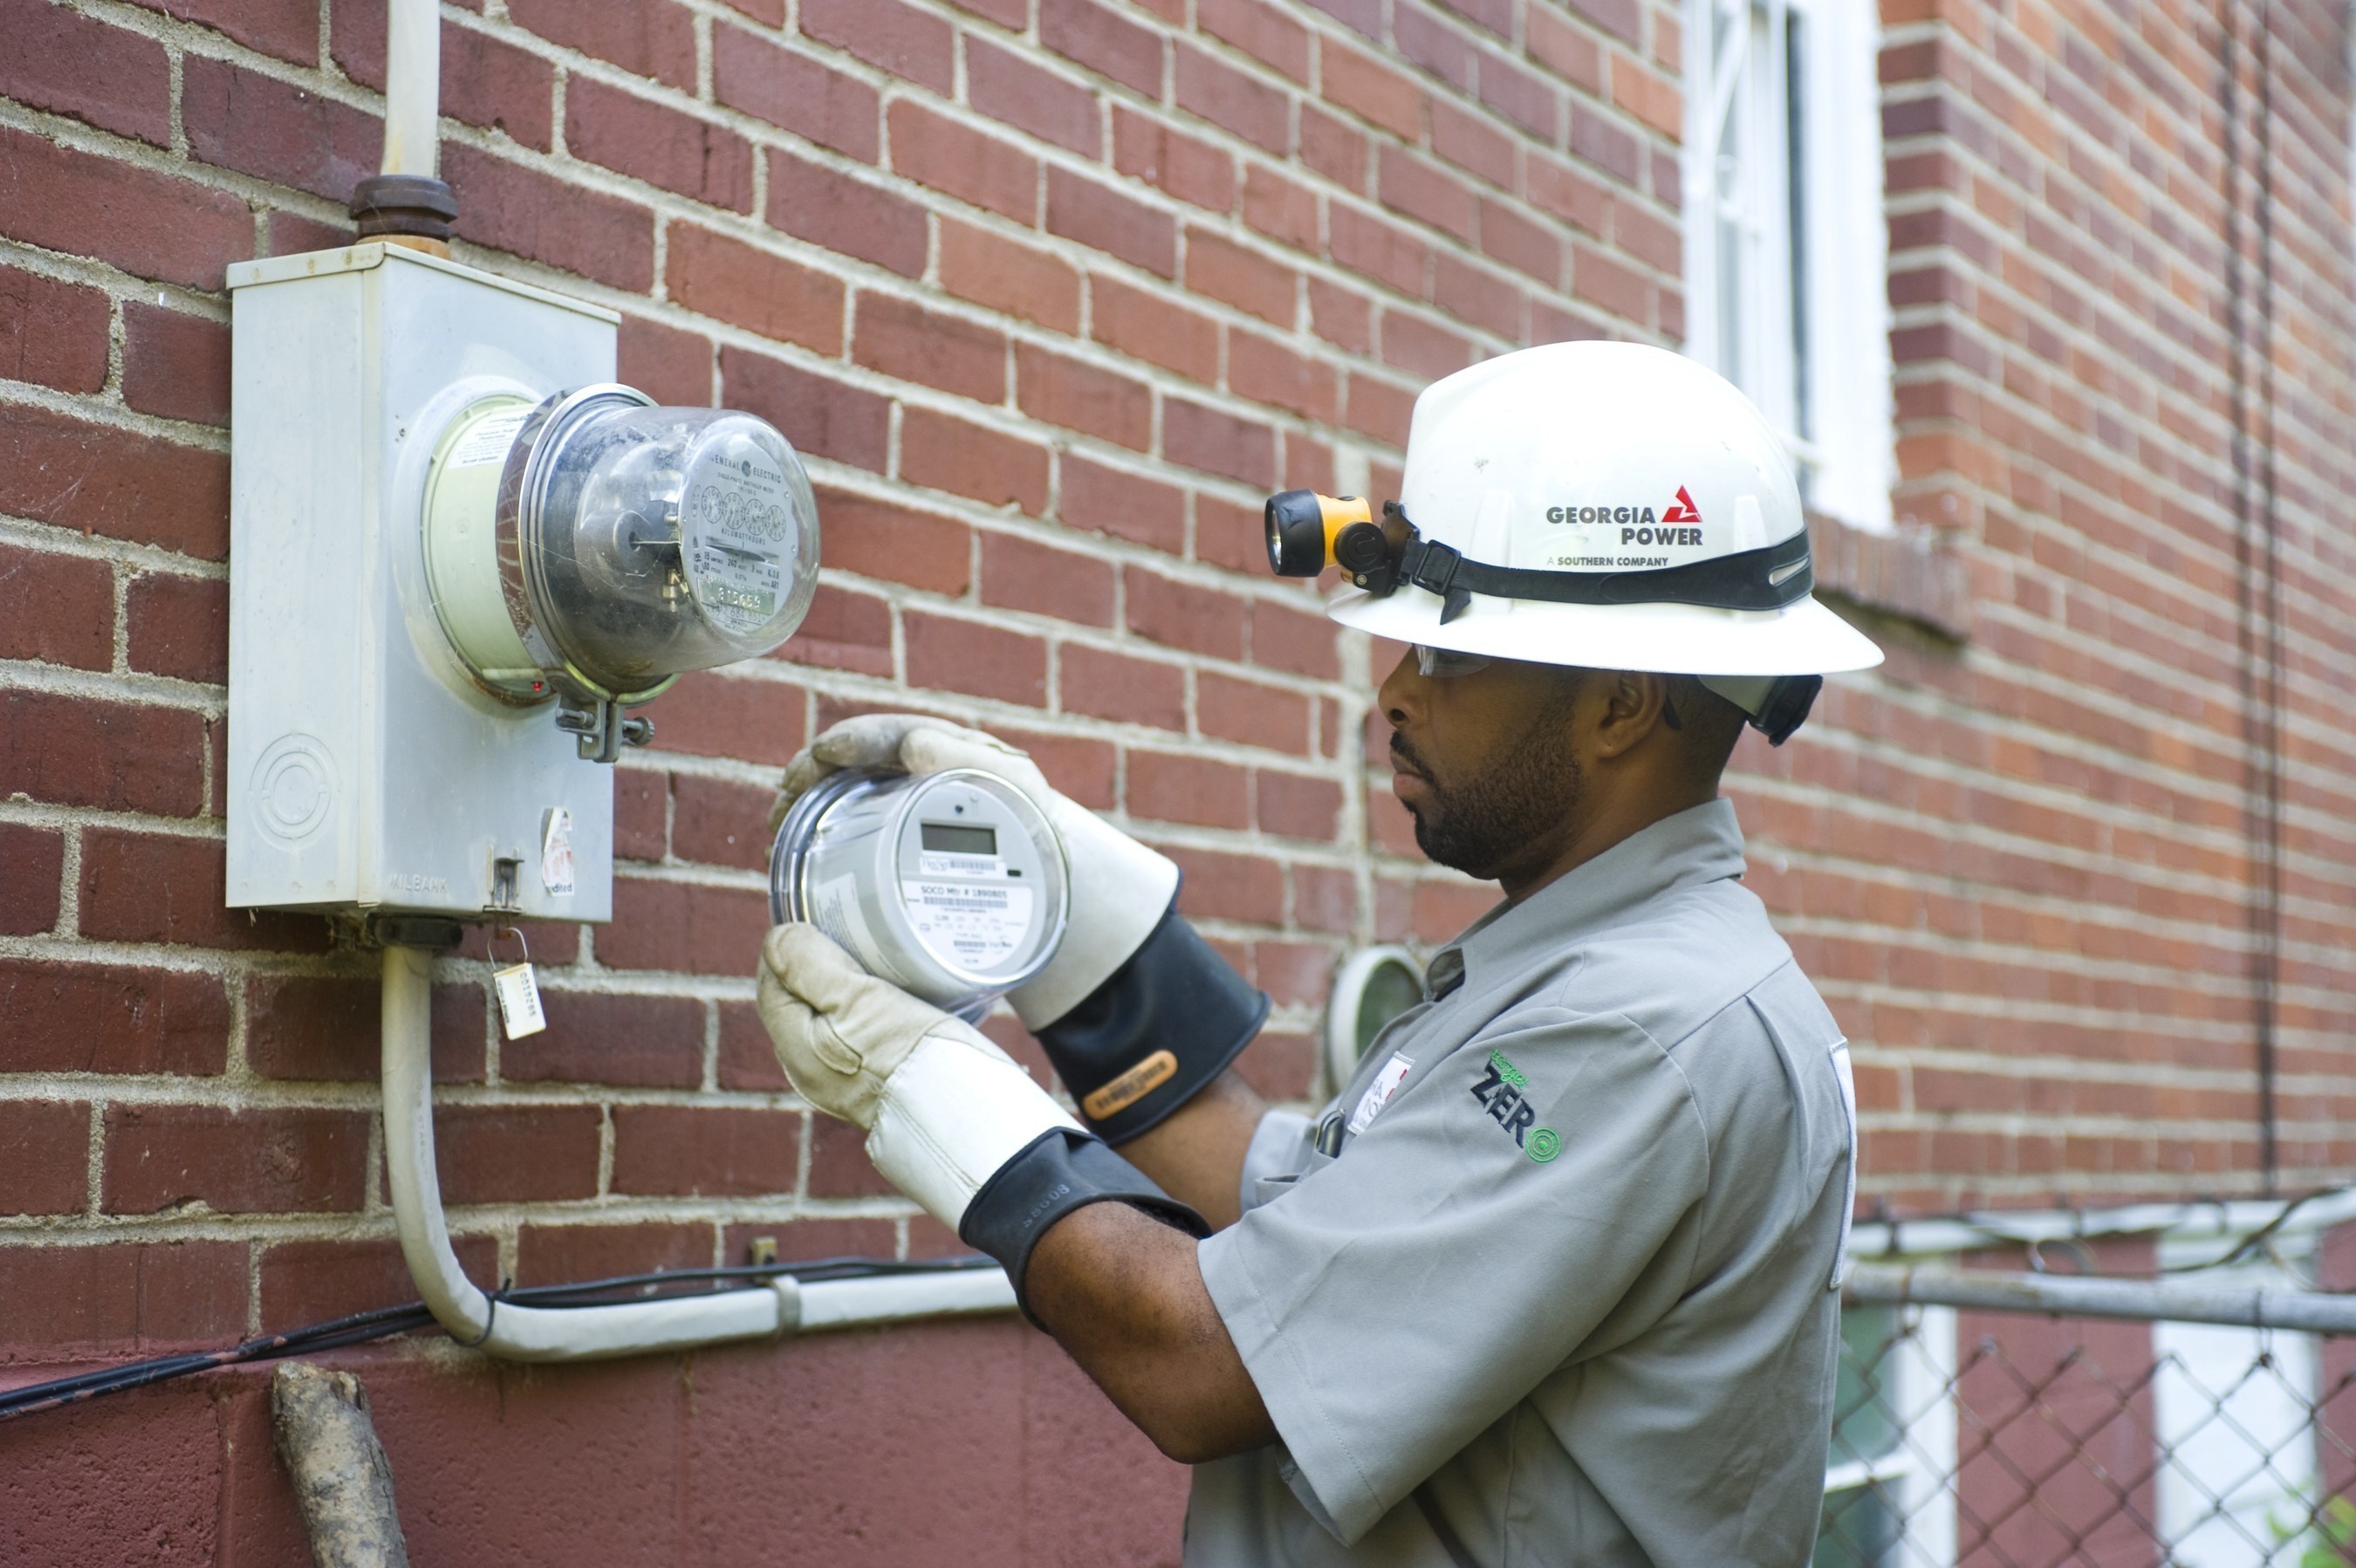 A Georgia Power employee replaces a mechanical meter with a digital "smart" meter in 2009. The meters are a part of the company's smart grid, which is reducing the frequency and duration of power outages.